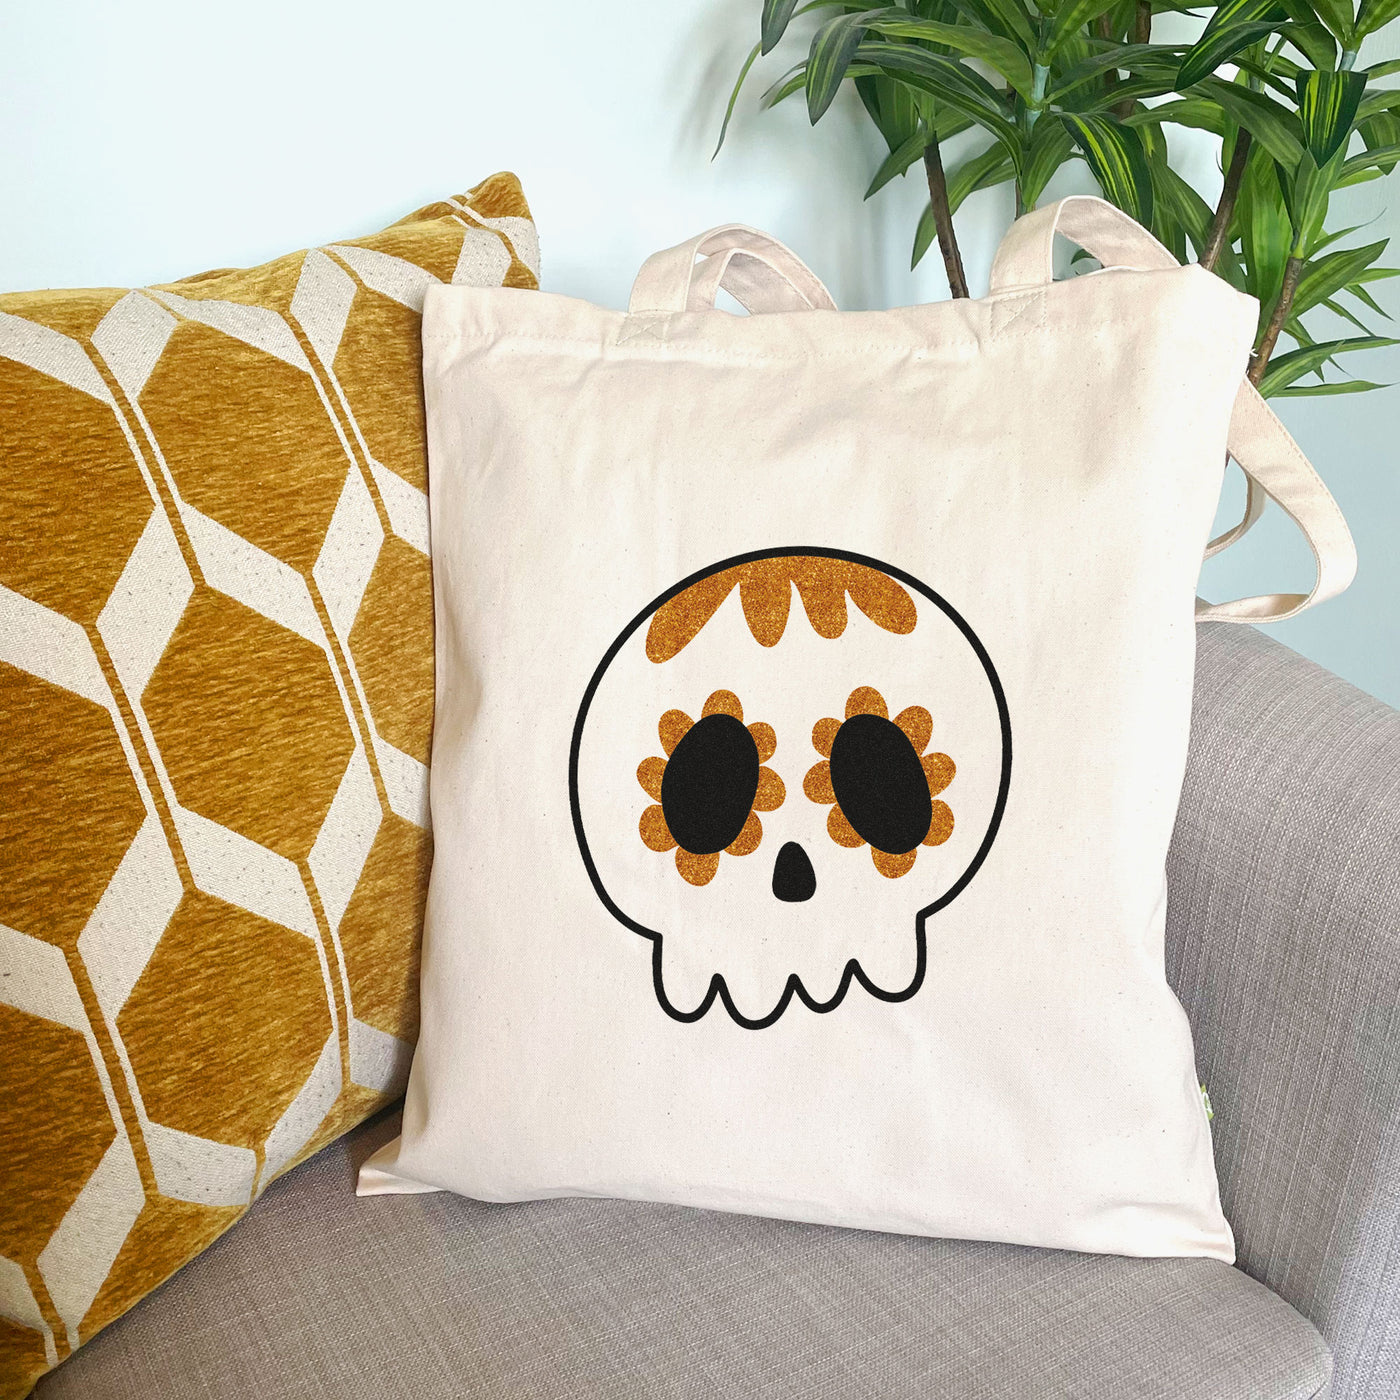 Day of the Dead Skull Tote Bag